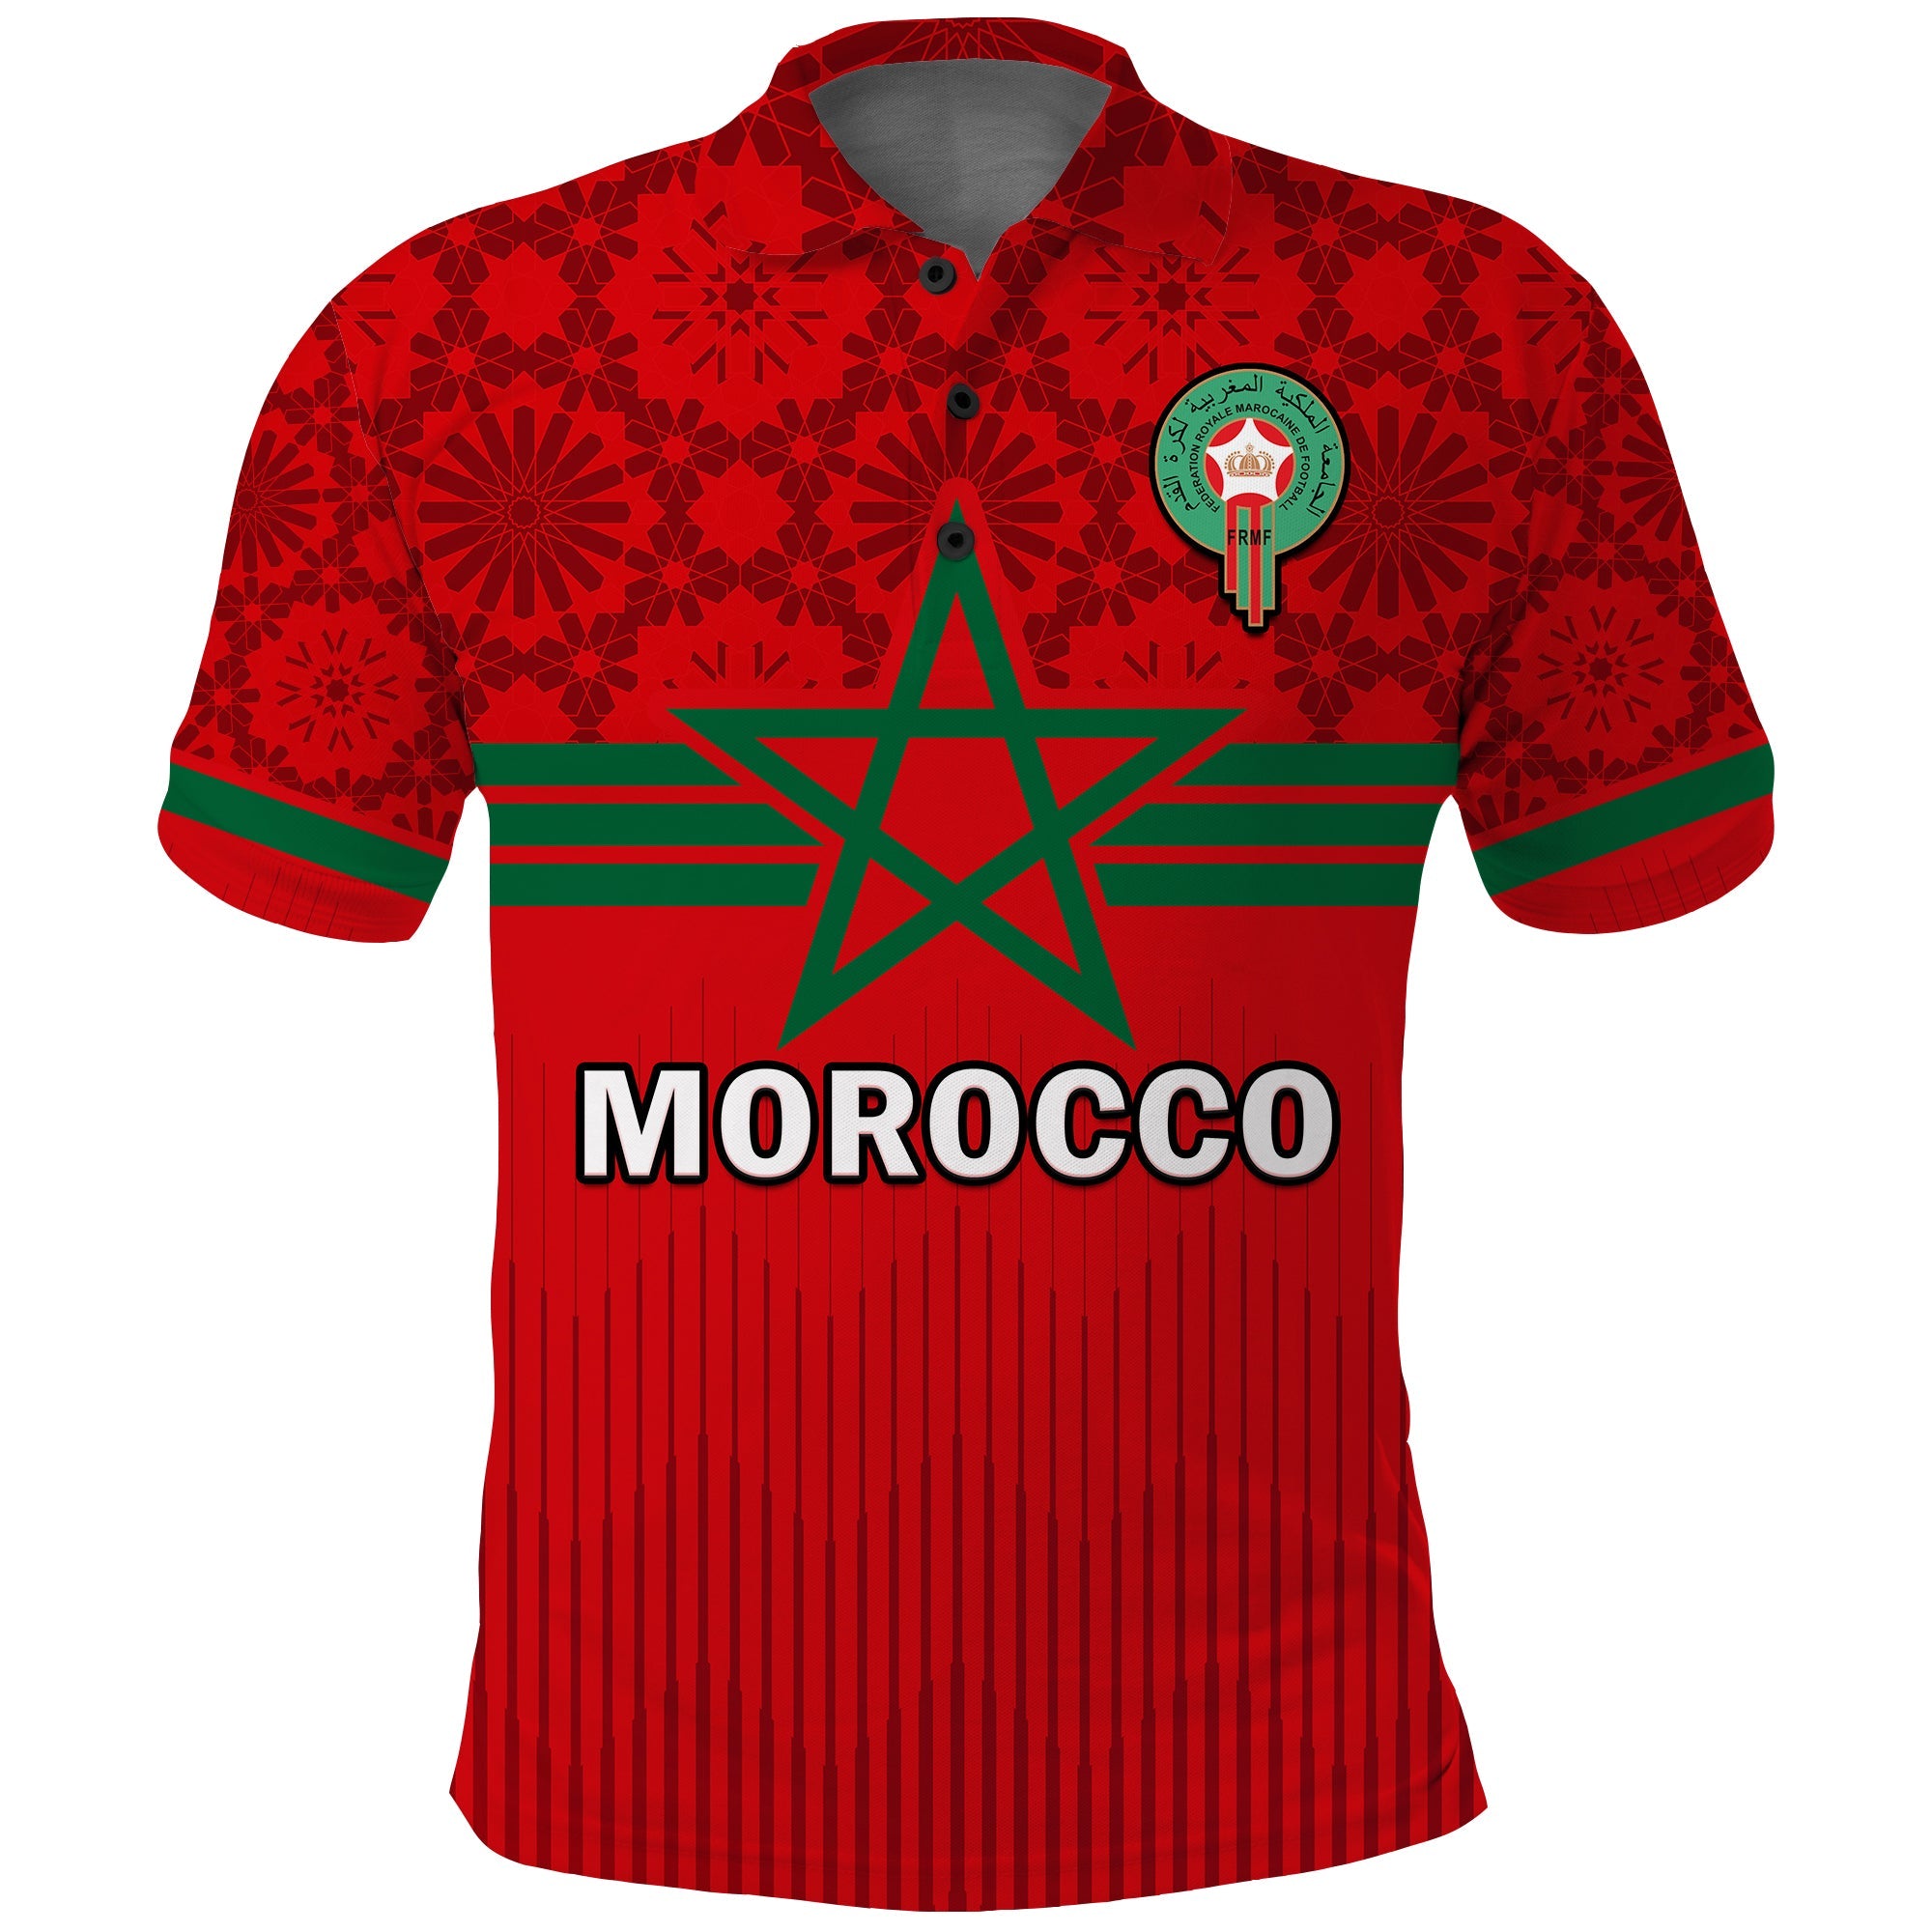 morocco-football-polo-shirt-world-cup-2022-red-moroccan-pattern